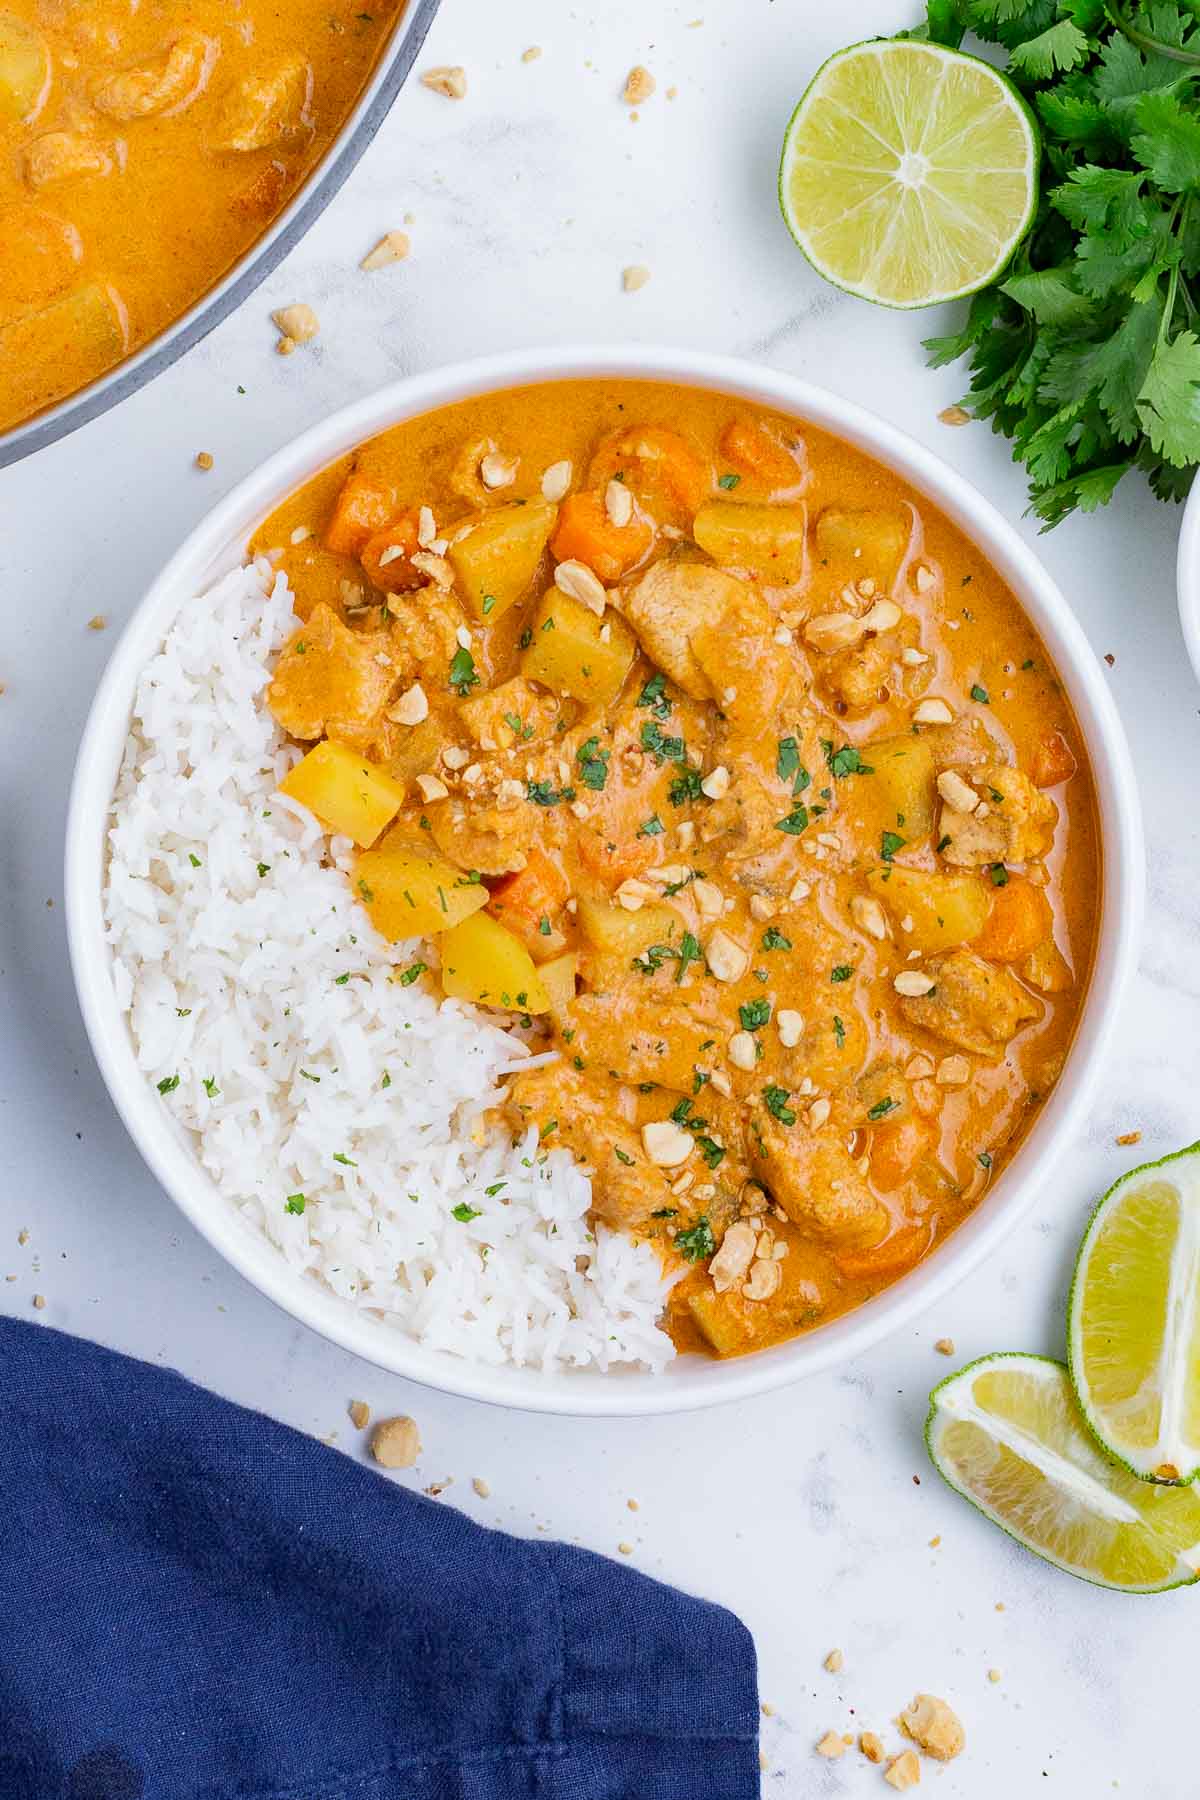 Massaman curry is is served with basmati rice in a white bowl.